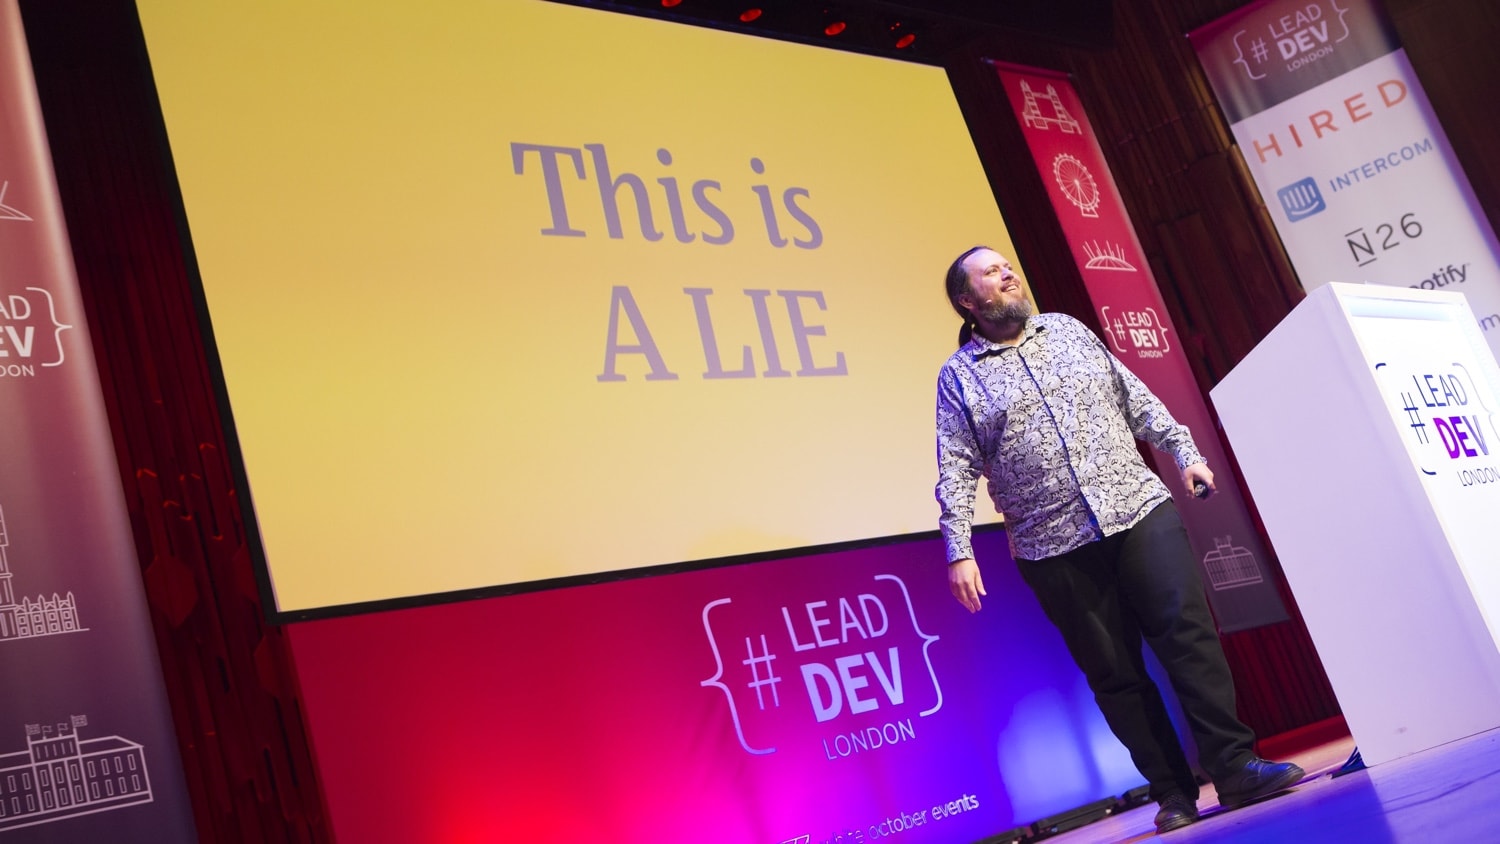 A somewhat pretentious picture of Adrian giving a talk at Lead Developer London 2018. Look at him. Grinning like a loon. For shame. There's a big slide projected behind him reading 'This is a LIE'